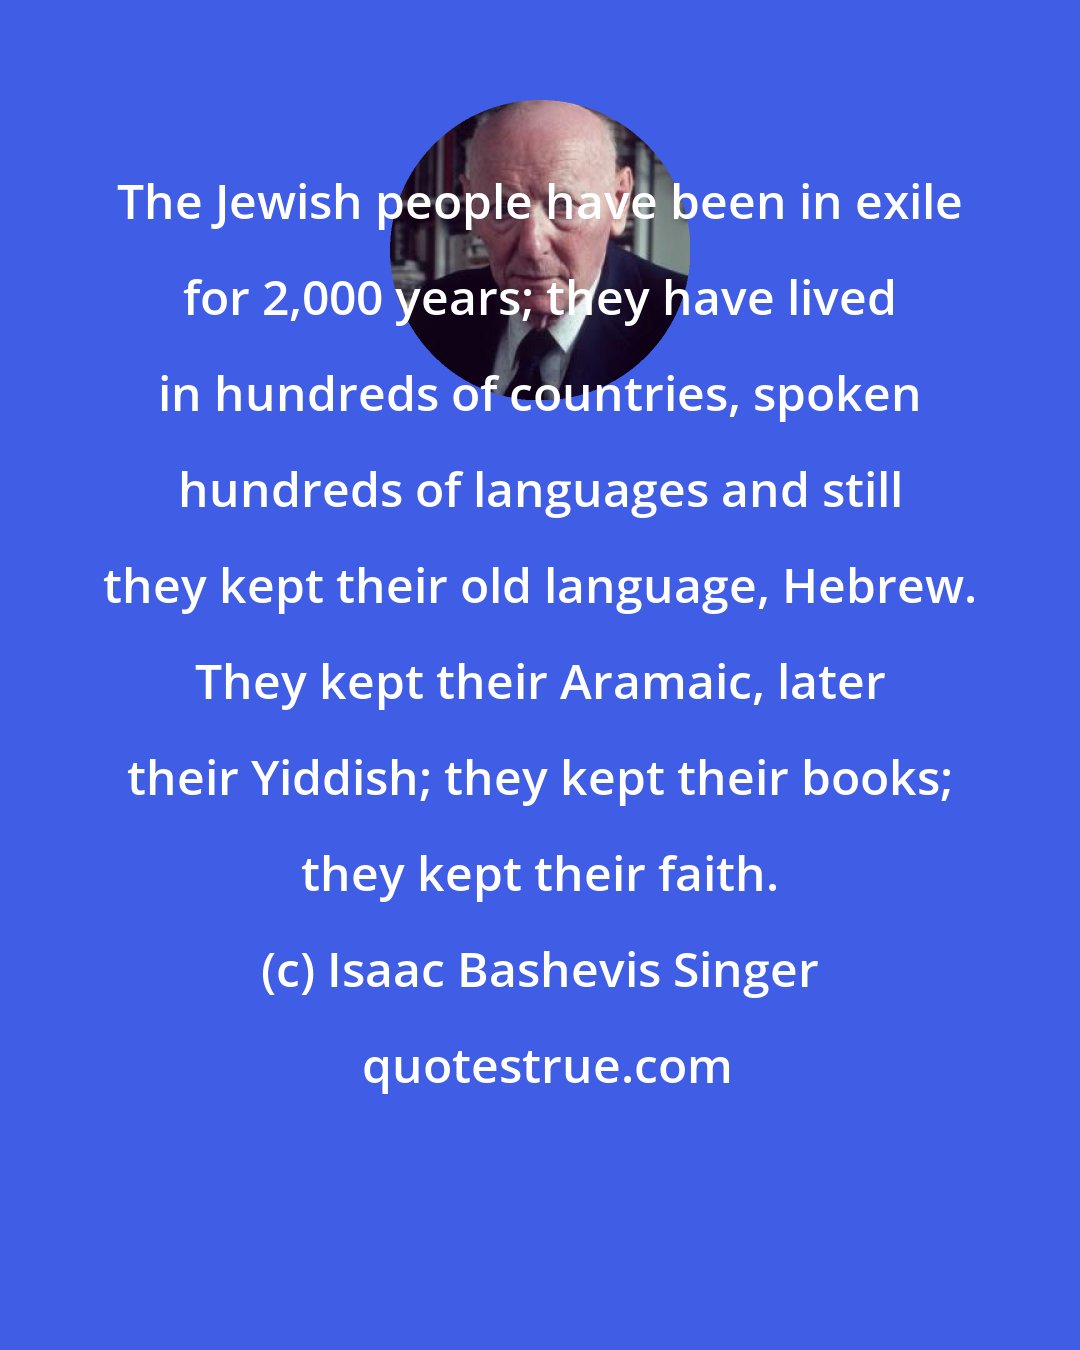 Isaac Bashevis Singer: The Jewish people have been in exile for 2,000 years; they have lived in hundreds of countries, spoken hundreds of languages and still they kept their old language, Hebrew. They kept their Aramaic, later their Yiddish; they kept their books; they kept their faith.